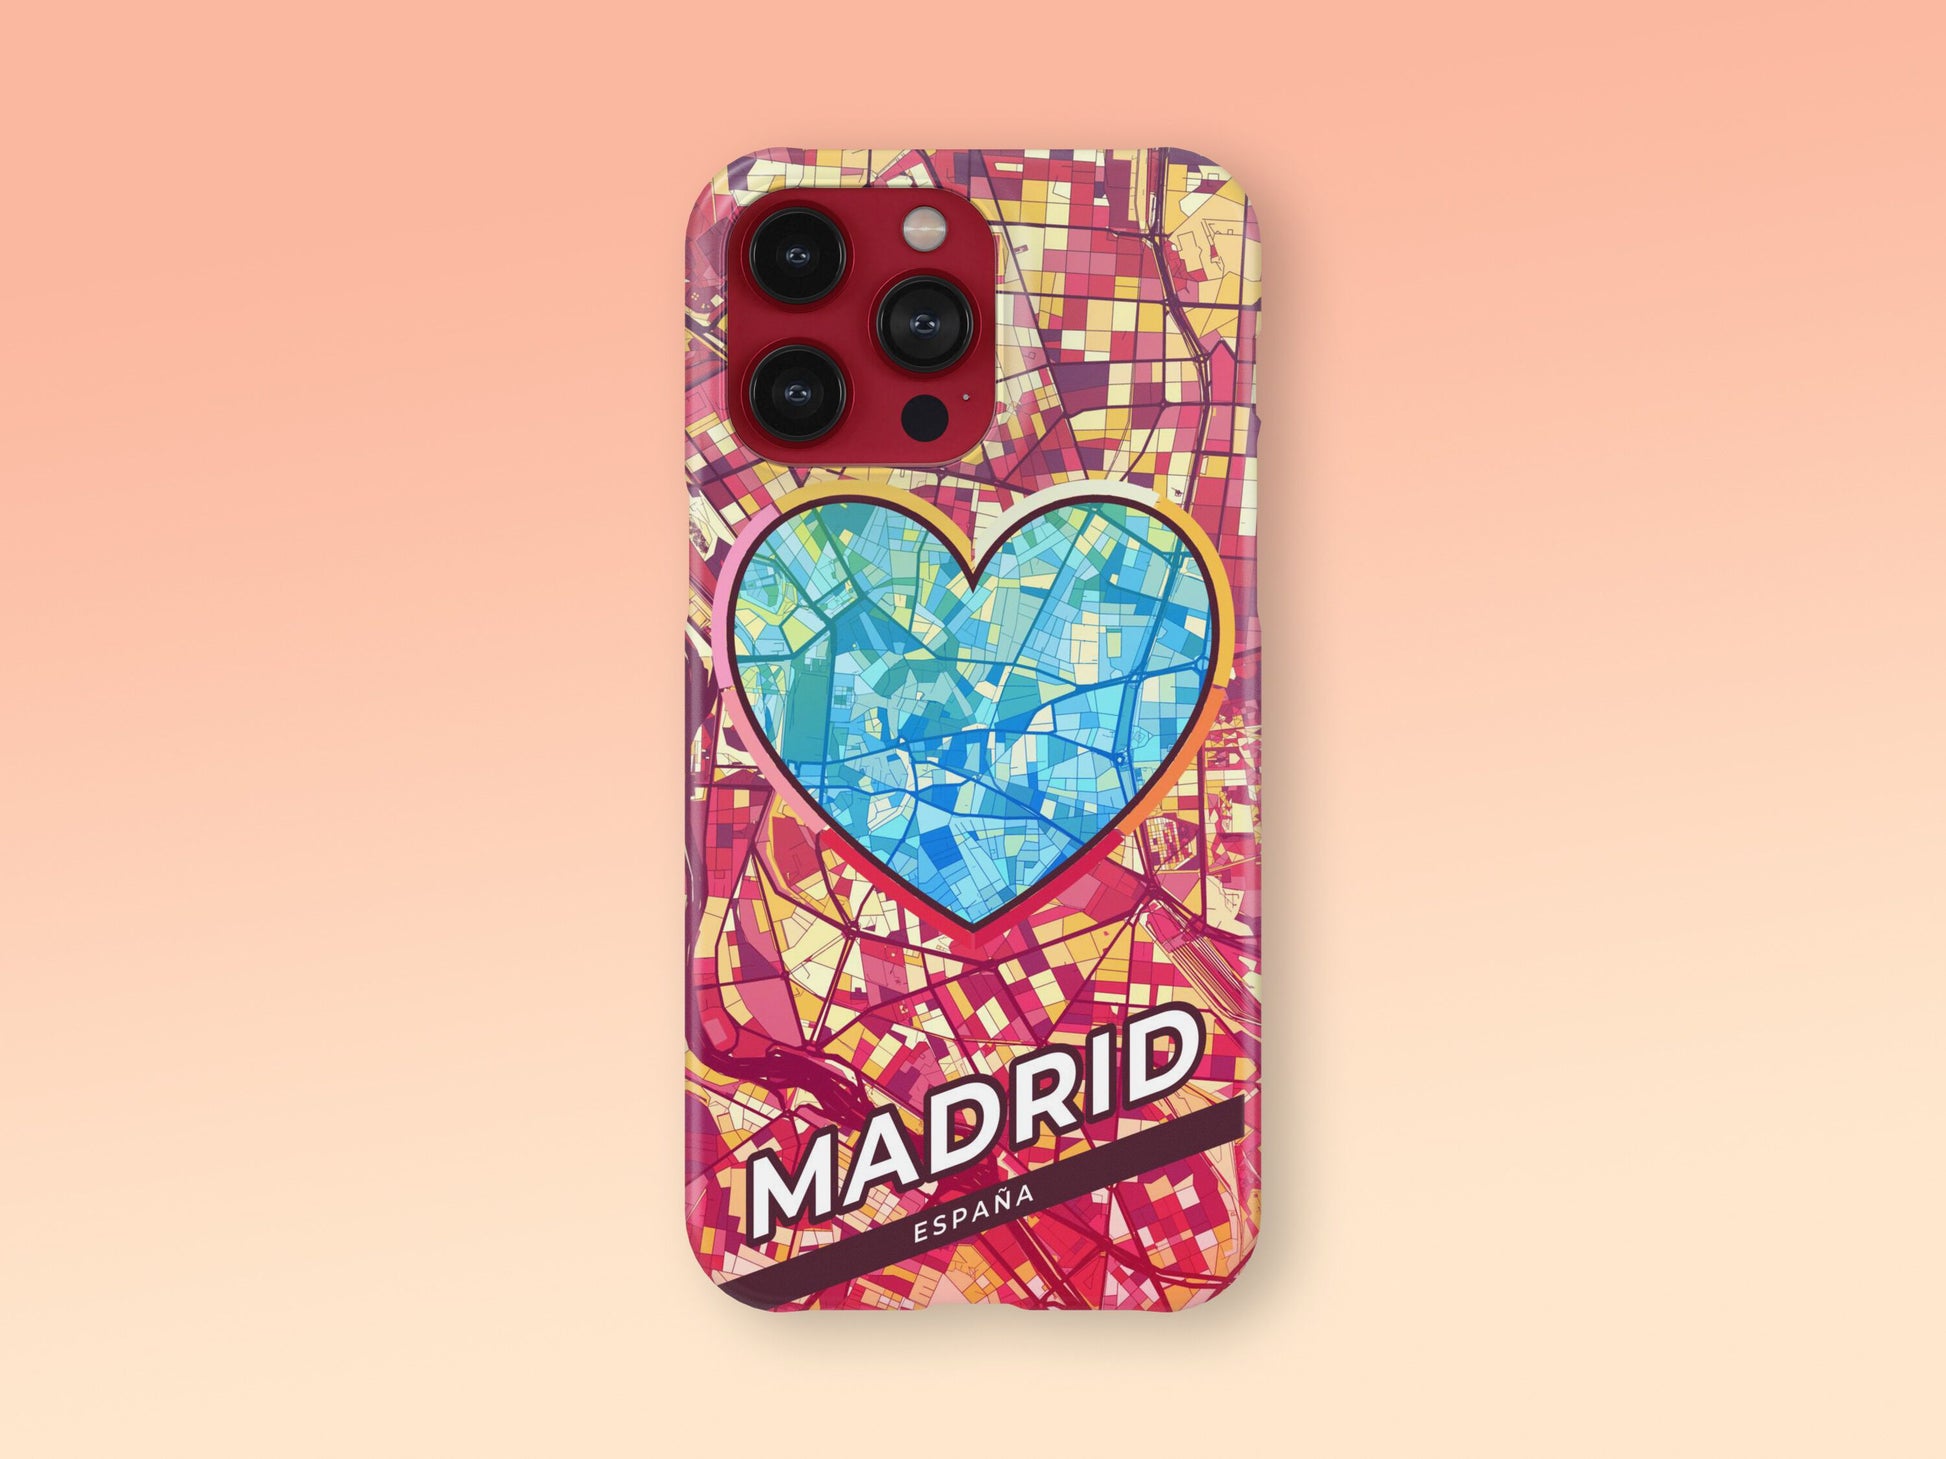 Madrid Spain slim phone case with colorful icon. Birthday, wedding or housewarming gift. Couple match cases. 2